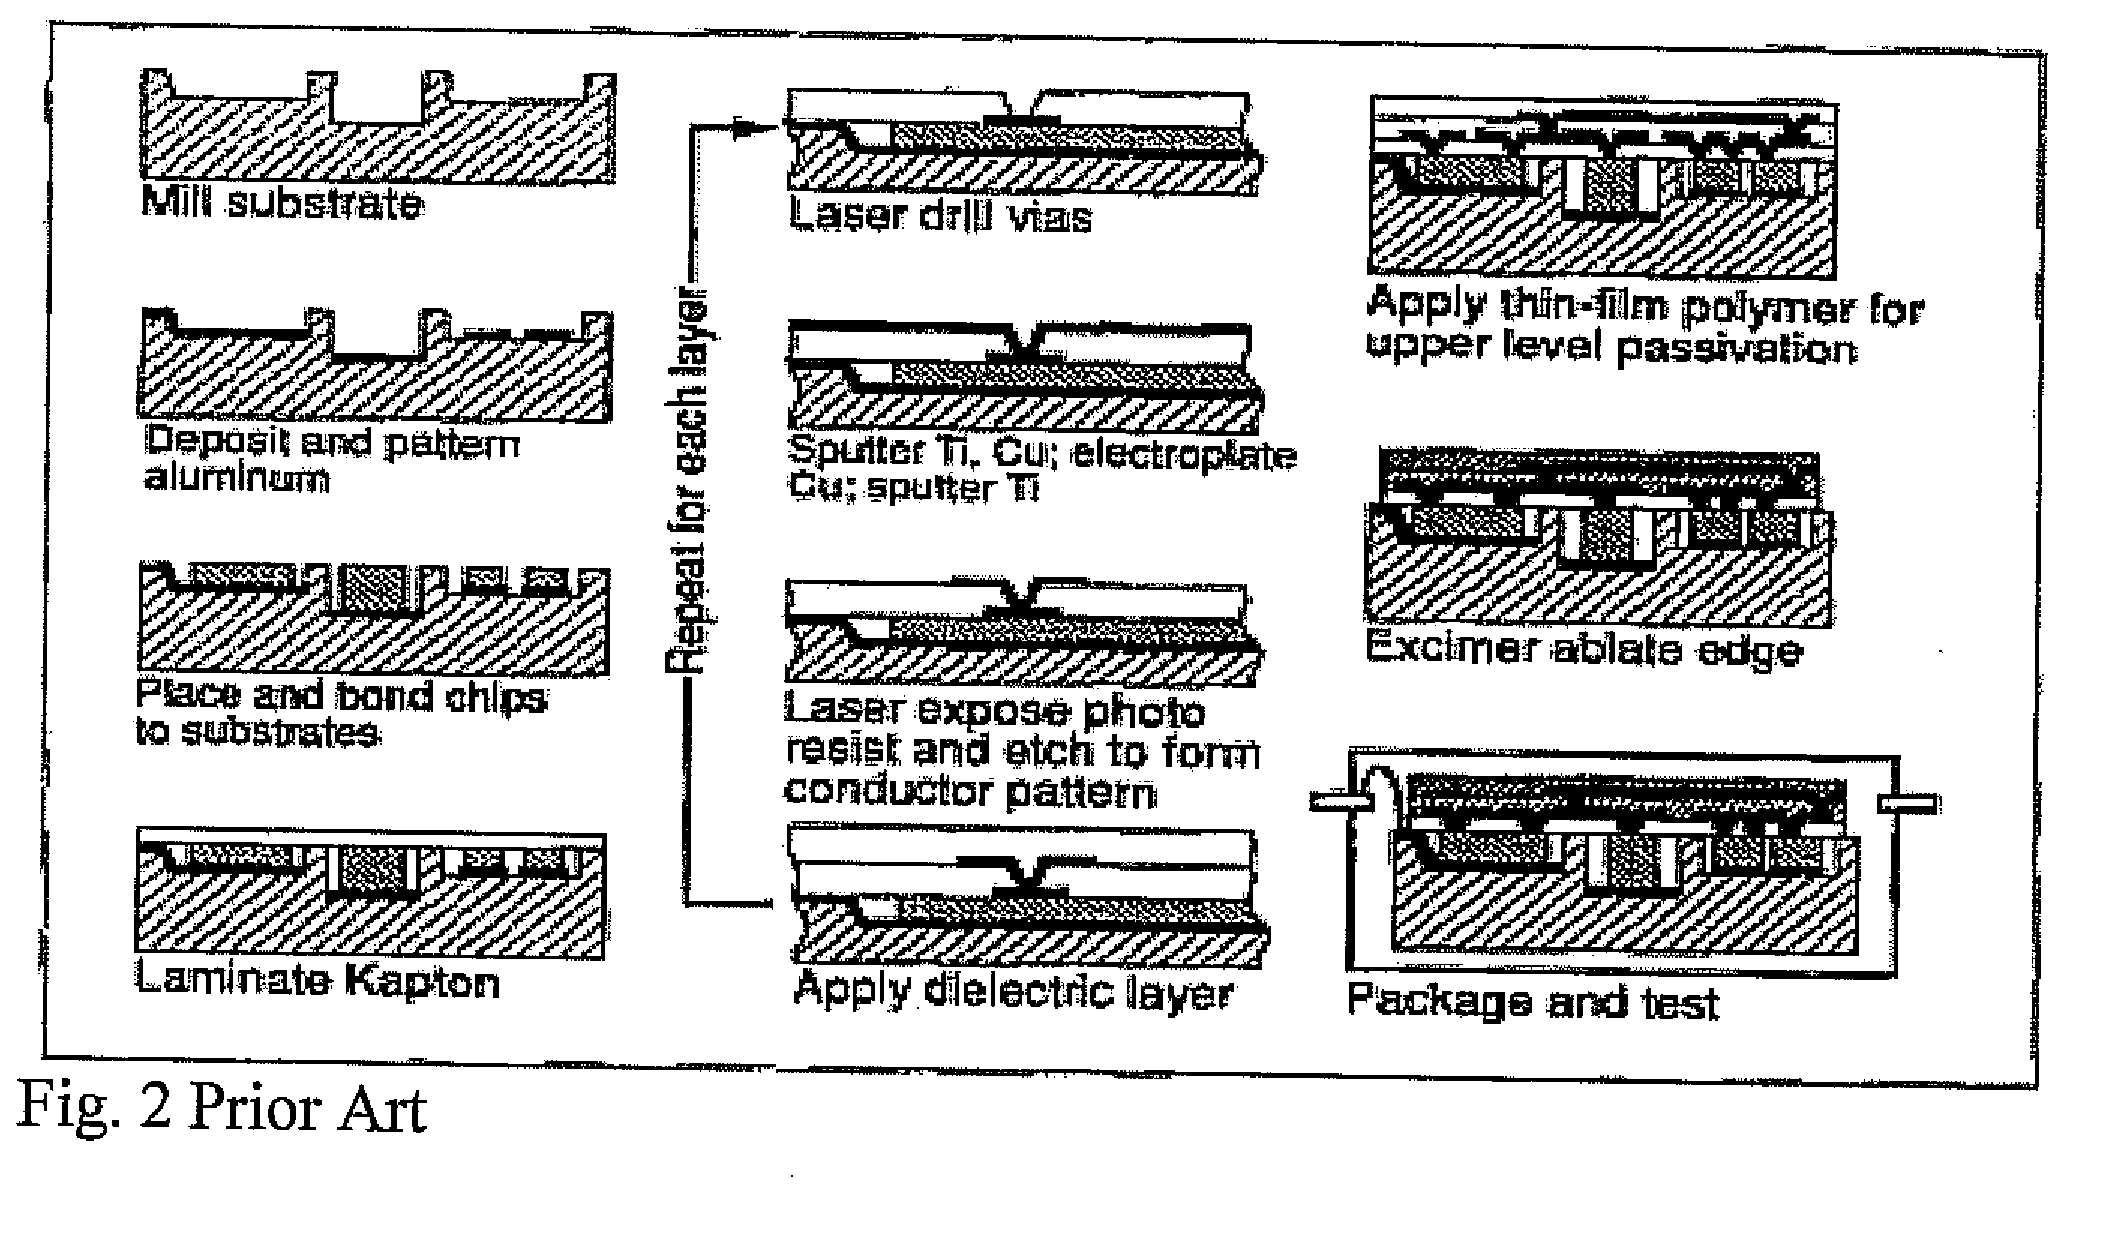 Method of forming monolithic cmos-mems hybrid integrated, packaged structures